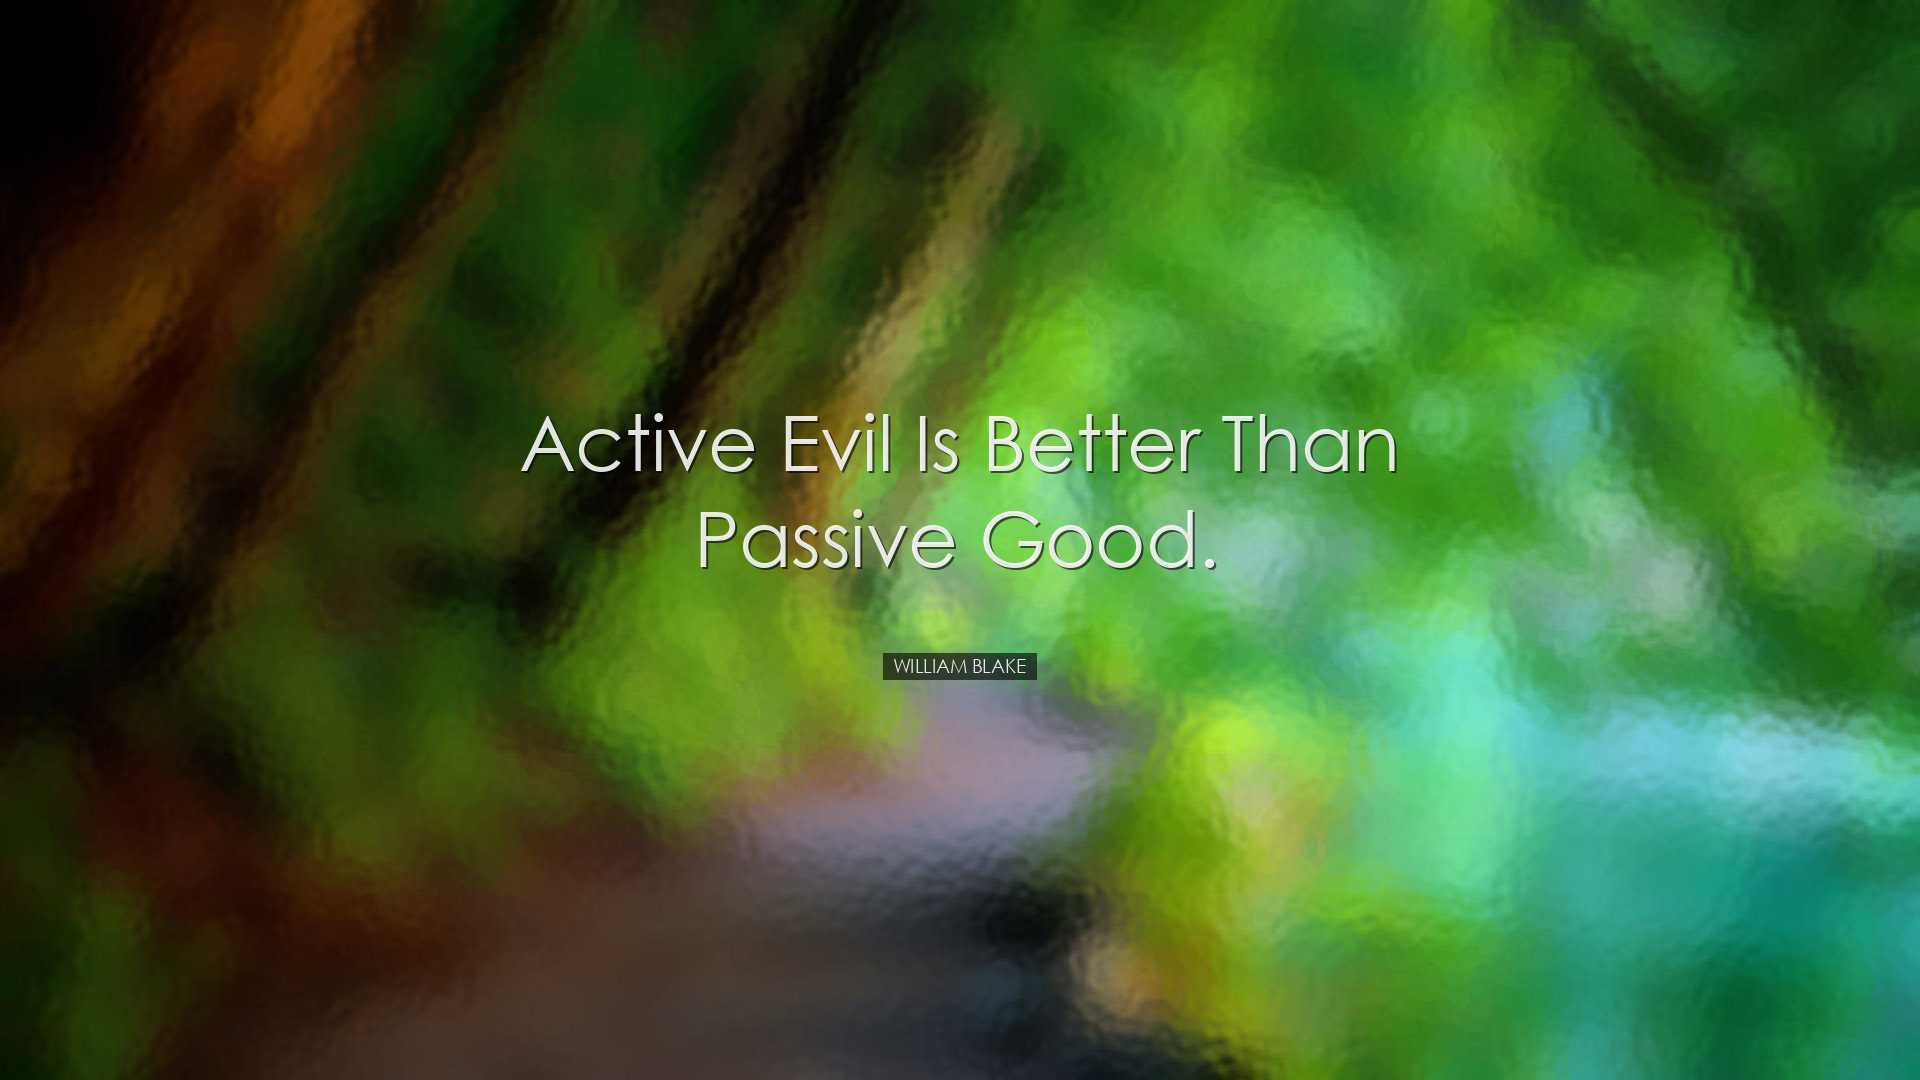 Active Evil is better than Passive Good. - William Blake